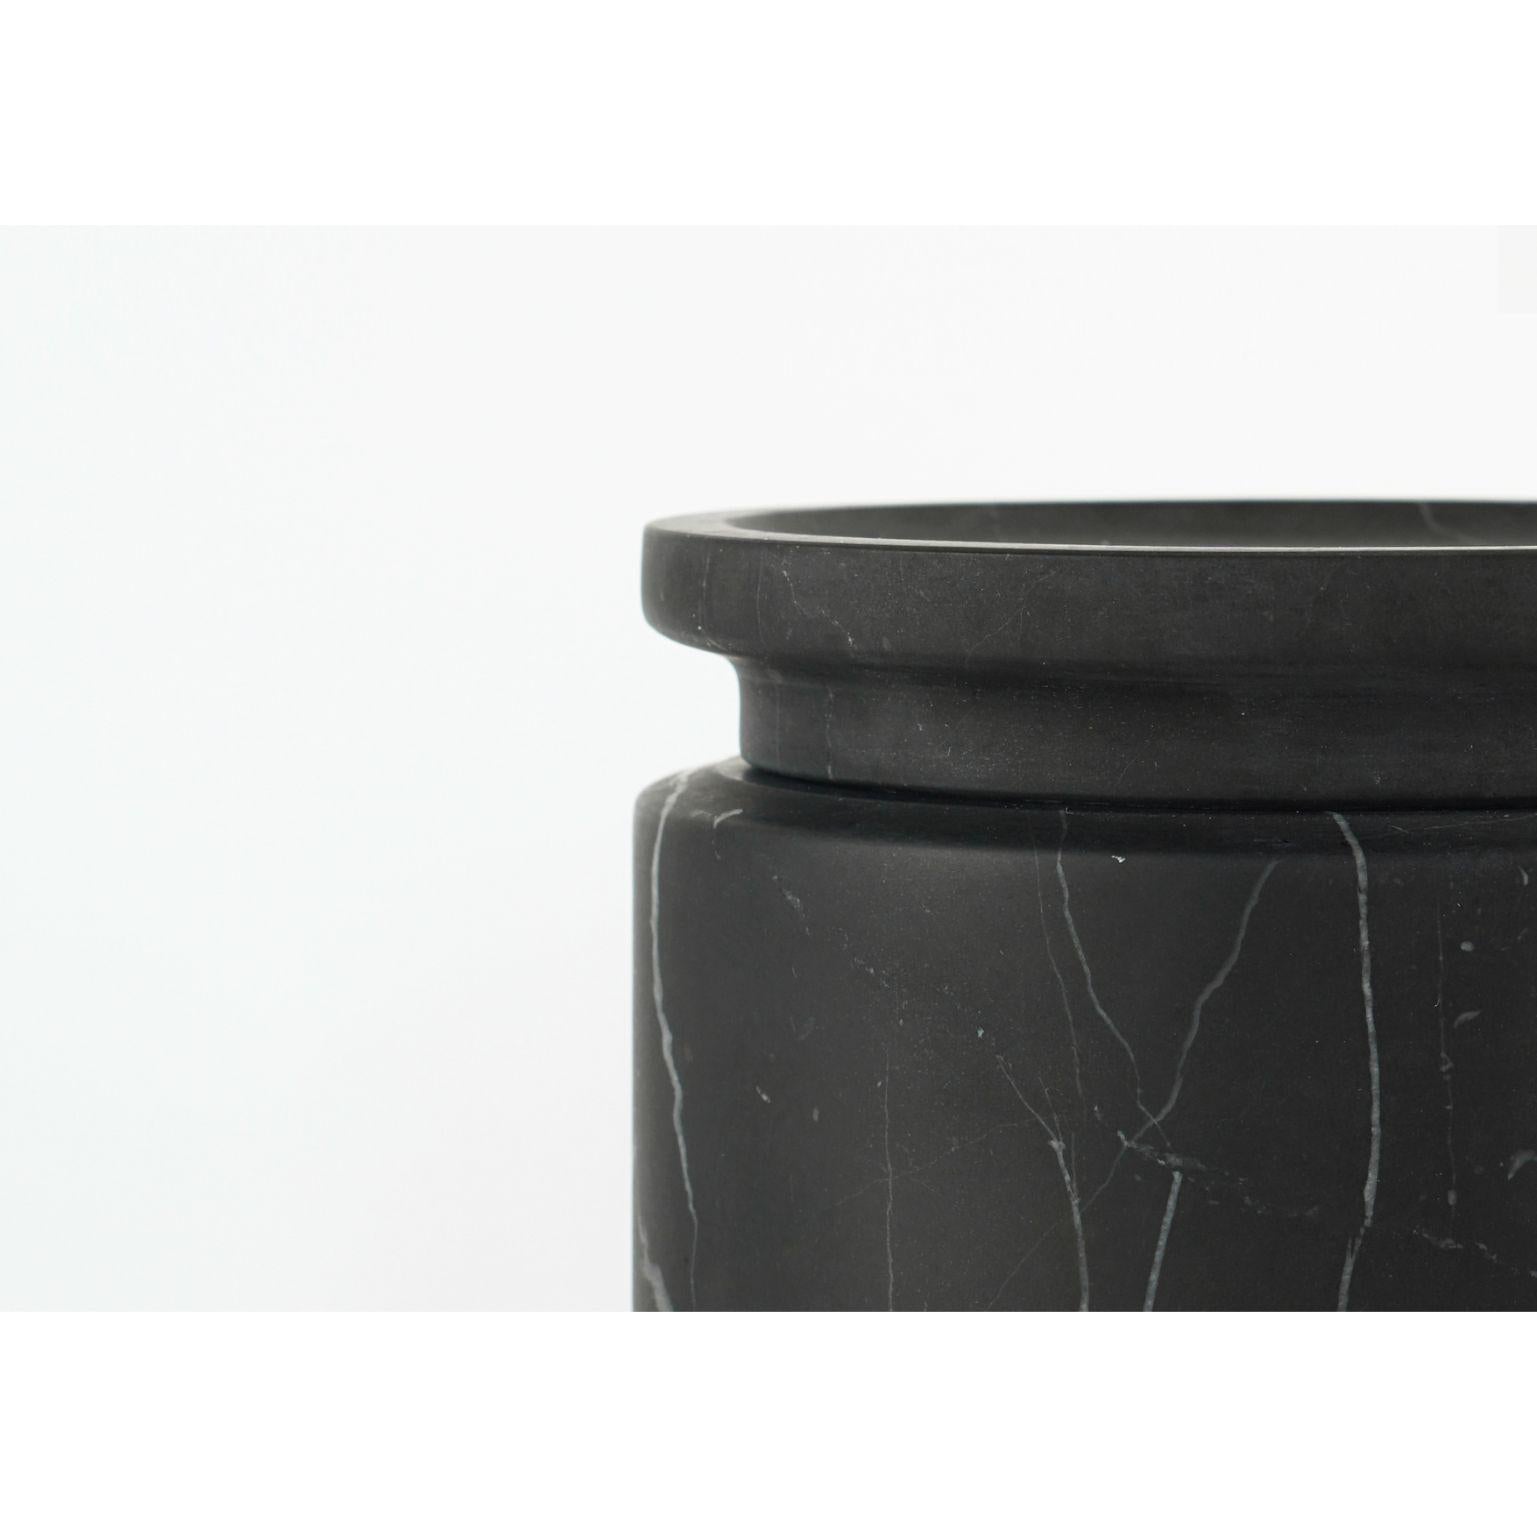 Pyxis - small pot - black by Ivan Colominas
Pyxis Collection
Dimensions: 12.6 x 11 cm
Materials: Nero Marquinia

Also available: Bianco Michelangelo, medium & large

A refined collection articulated through cylinders that vary only in size